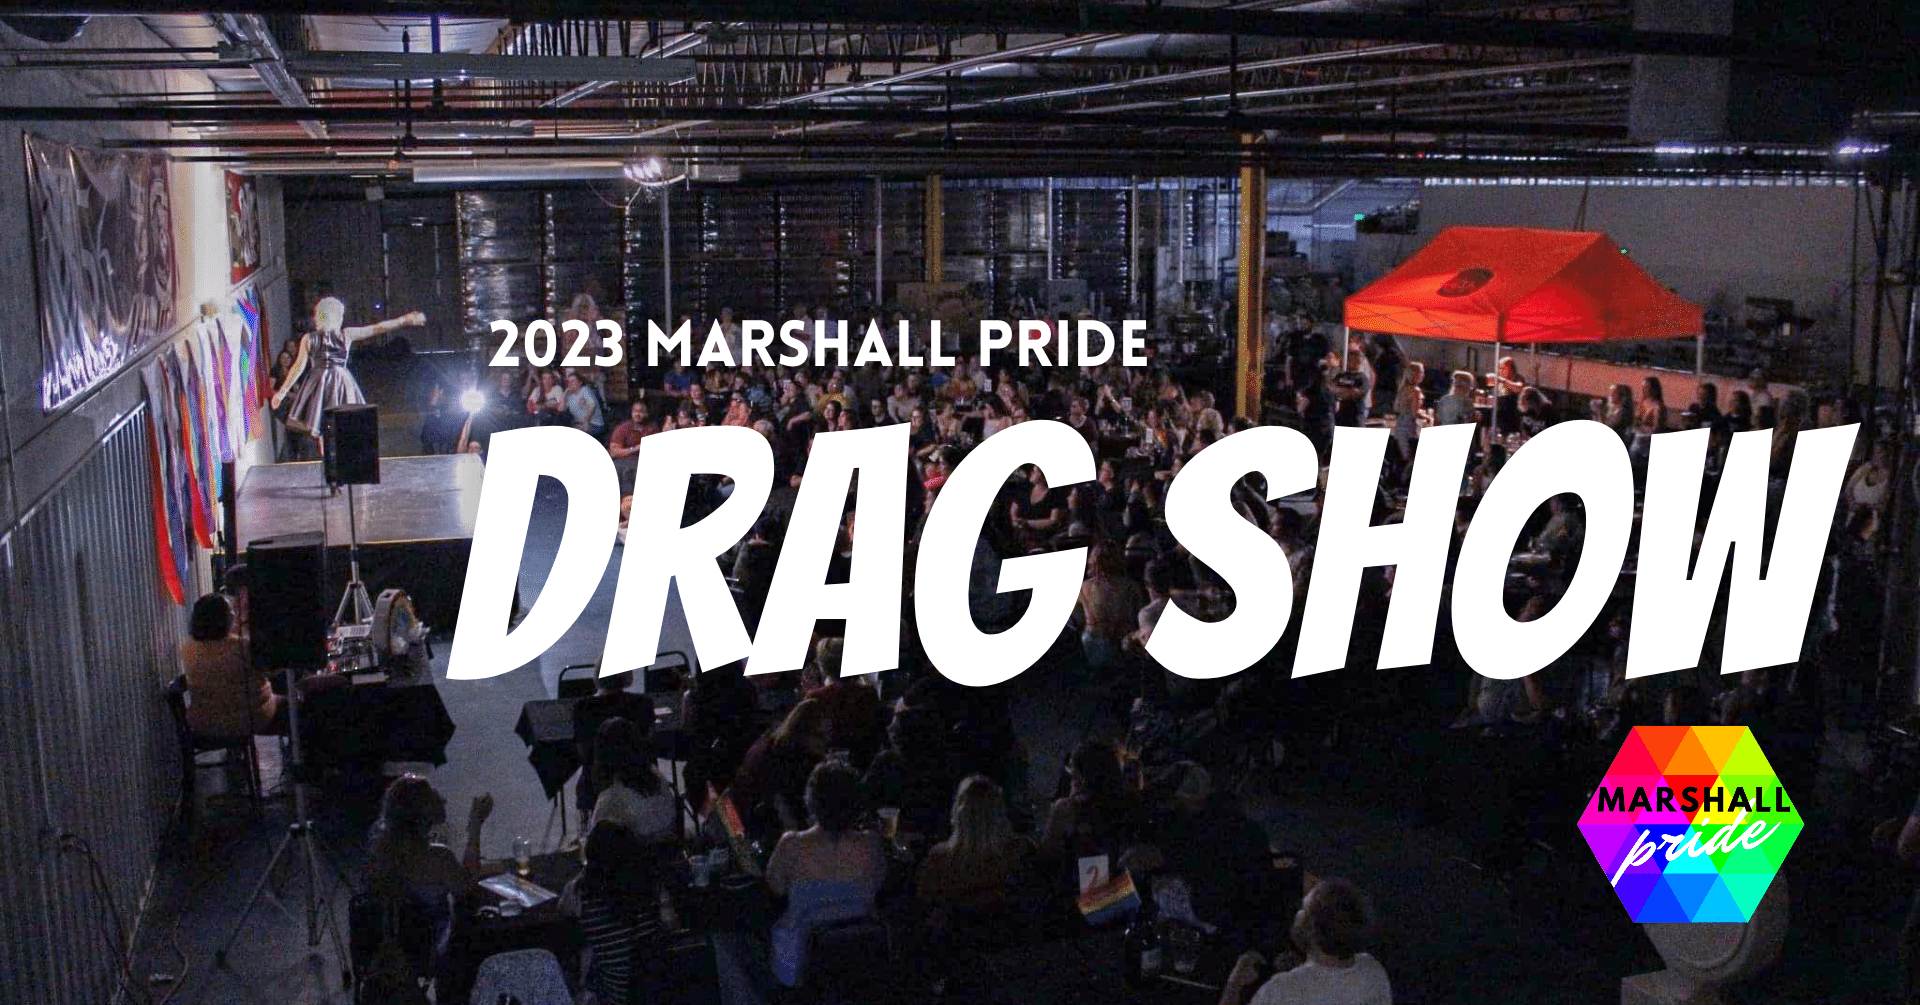 2023 Marshall Pride Event Covers